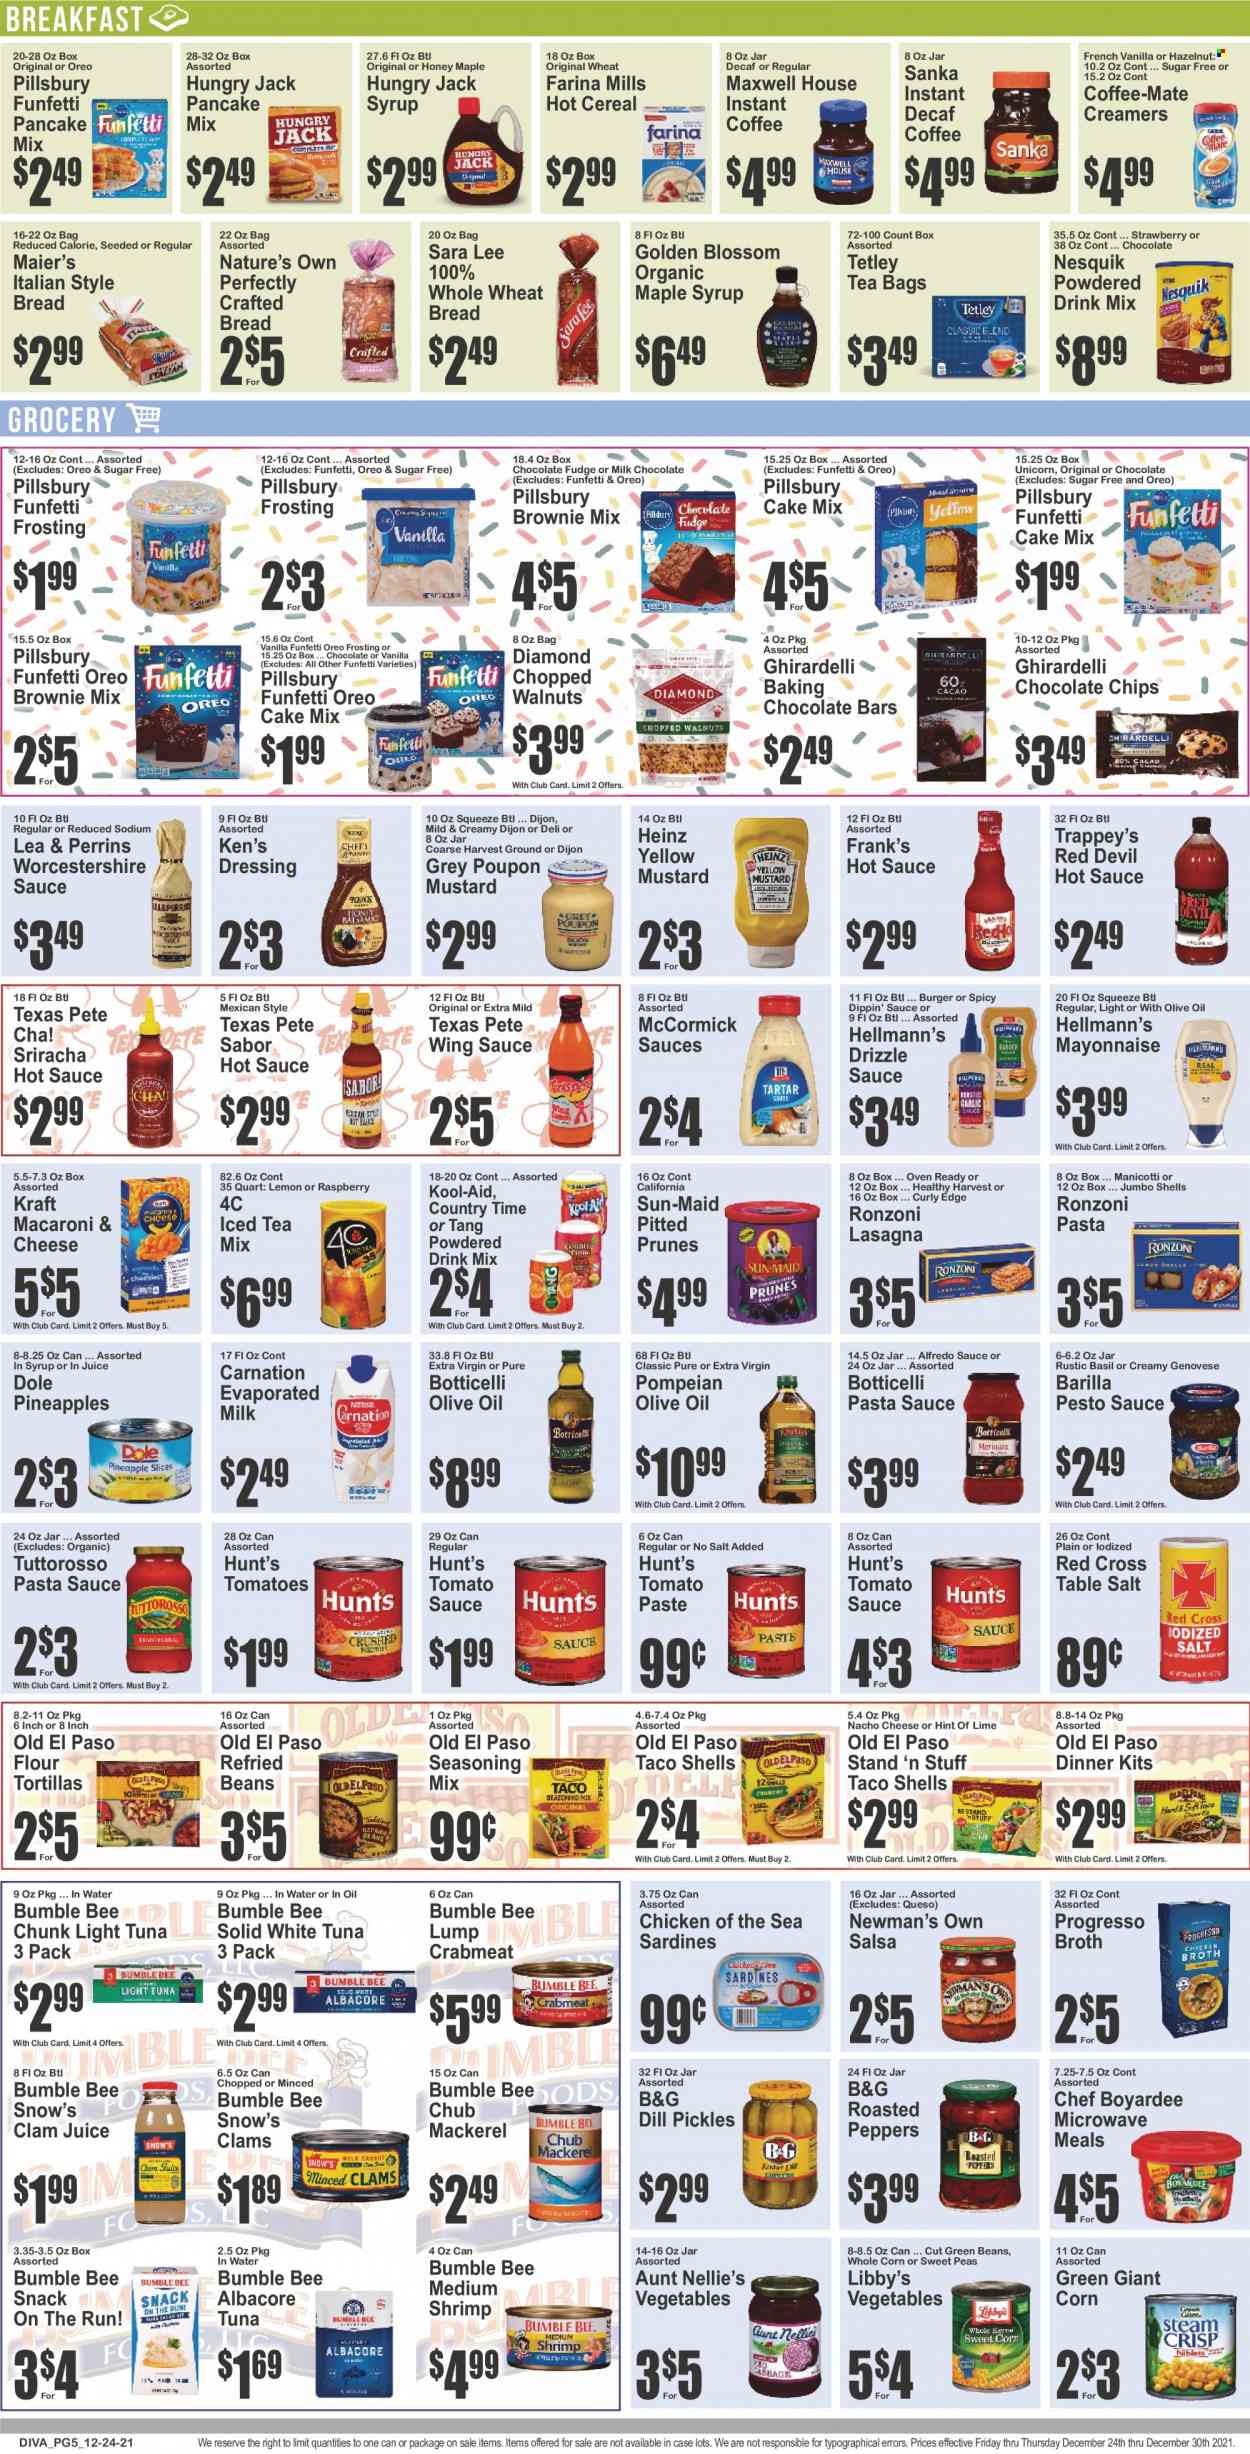 thumbnail - Key Food Flyer - 12/24/2021 - 12/30/2021 - Sales products - tortillas, wheat bread, Old El Paso, Sara Lee, flour tortillas, brownie mix, cake mix, corn, green beans, peas, Dole, peppers, pineapple, clams, crab meat, mackerel, sardines, tuna, shrimps, macaroni & cheese, pasta sauce, hamburger, Bumble Bee, pancakes, Pillsbury, dinner kit, Barilla, Progresso, lasagna meal, Alfredo sauce, Kraft®, Oreo, Nesquik, Coffee-Mate, evaporated milk, Blossom, mayonnaise, Hellmann’s, fudge, milk chocolate, snack, Ghirardelli, chocolate bar, frosting, broth, refried beans, tomato paste, tomato sauce, Heinz, pickles, light tuna, Chicken of the Sea, Chef Boyardee, cereals, esponja, dill, spice, mustard, sriracha, worcestershire sauce, hot sauce, pesto, dressing, salsa, wing sauce, extra virgin olive oil, maple syrup, walnuts, prunes, dried fruit, juice, Country Time, powder drink, Maxwell House, tea bags, instant coffee, Nature's Own. Page 5.